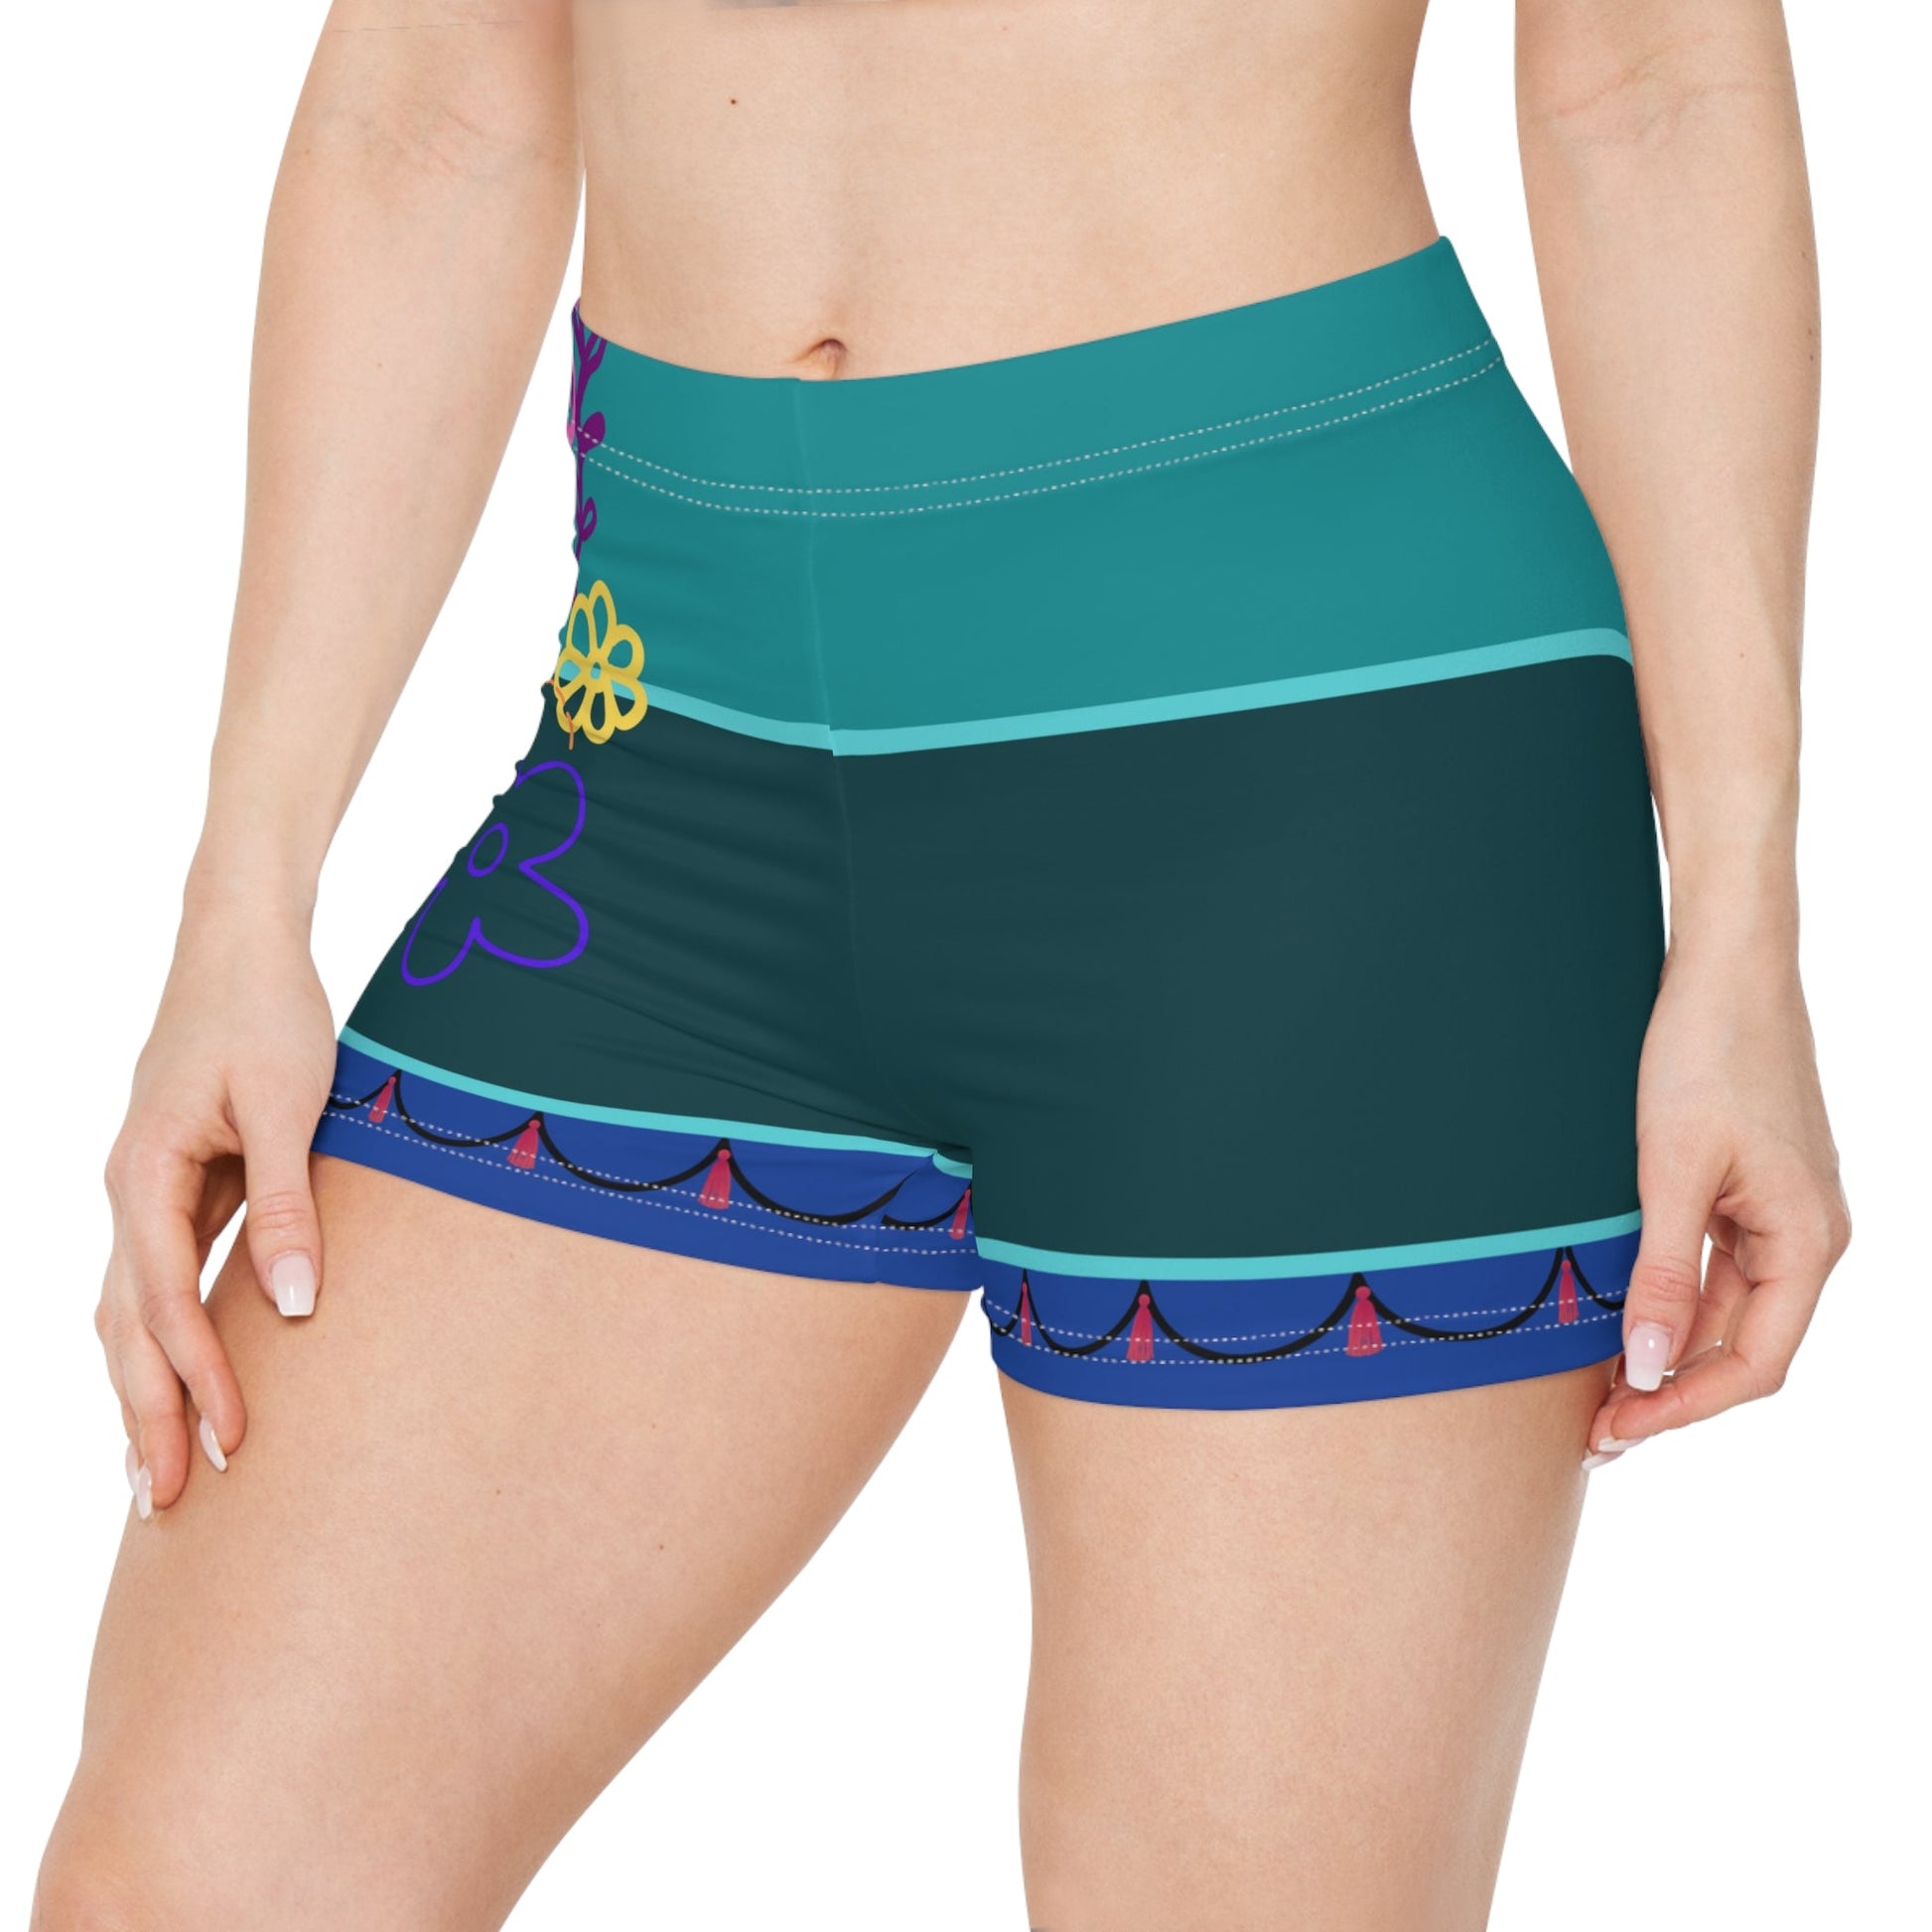 The Asha Women’s Recycled Athletic Shorts